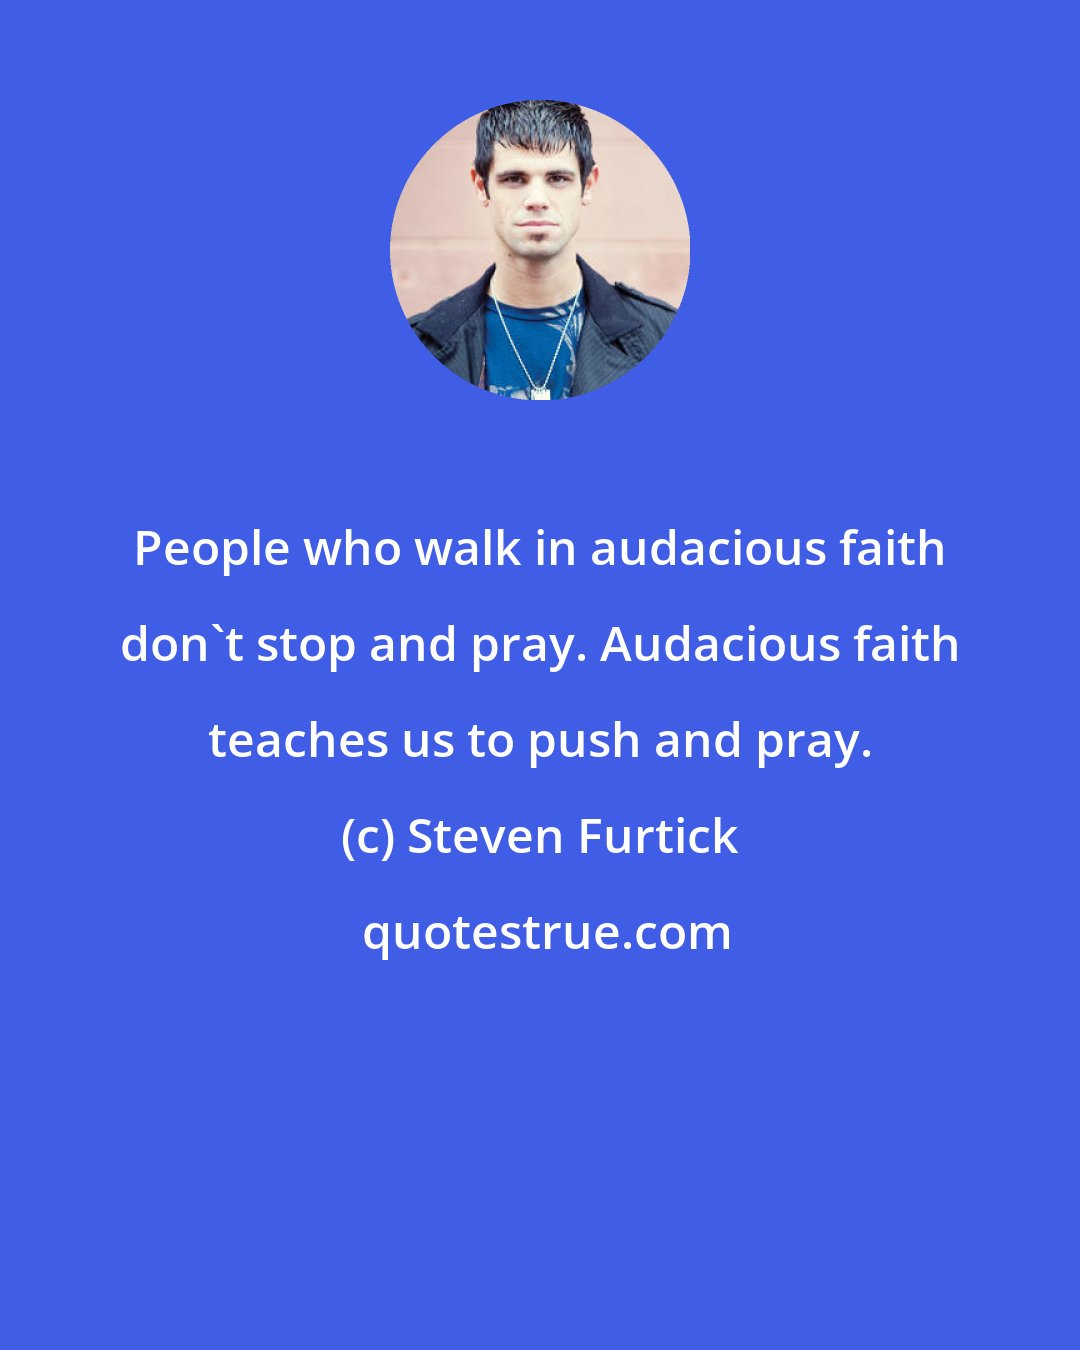 Steven Furtick: People who walk in audacious faith don't stop and pray. Audacious faith teaches us to push and pray.